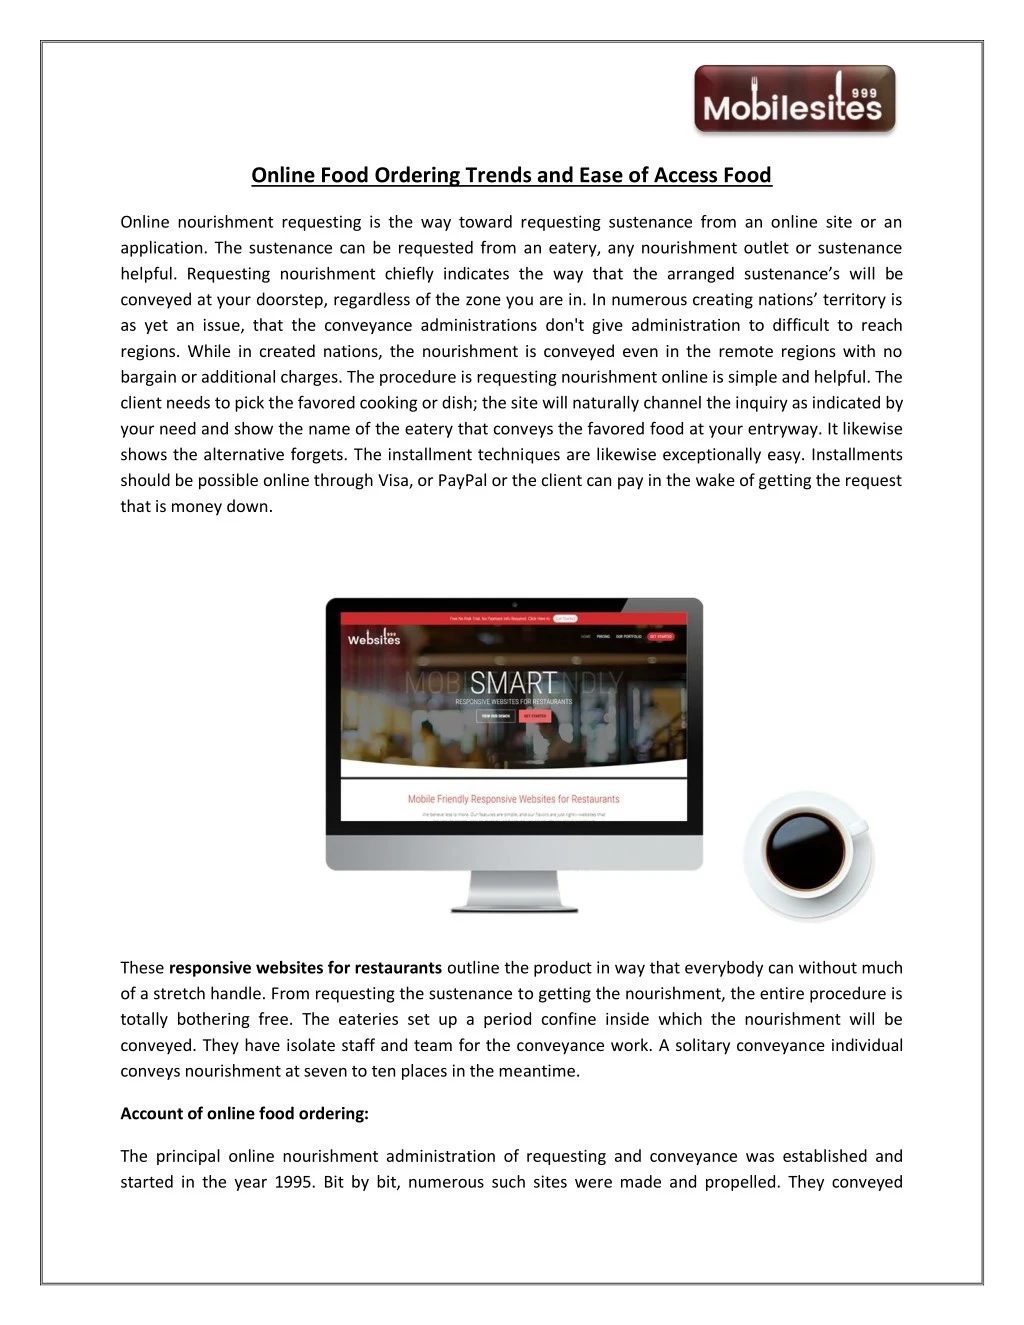 online food ordering trends and ease of access